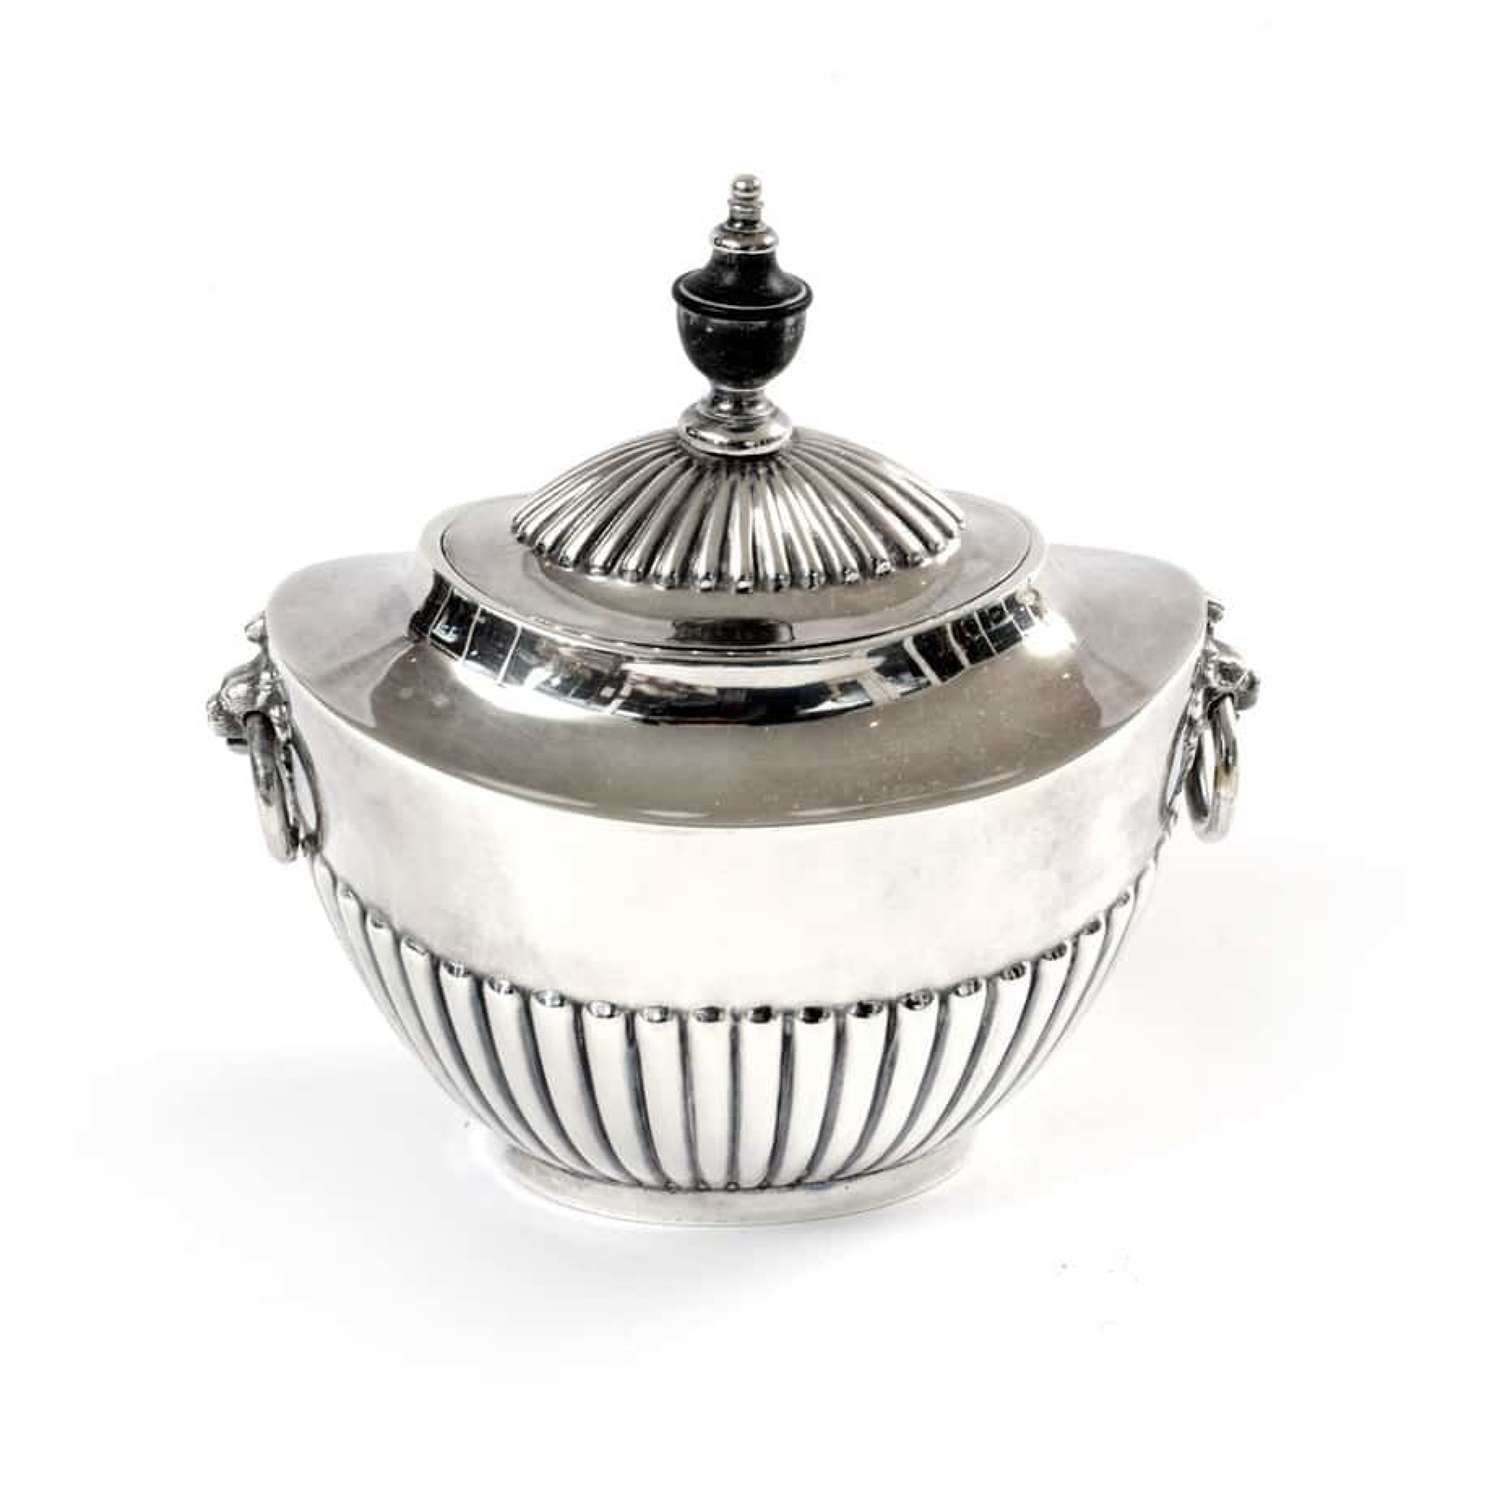 Silver plated sugar pot - by Goldsmiths and Silversmiths Company